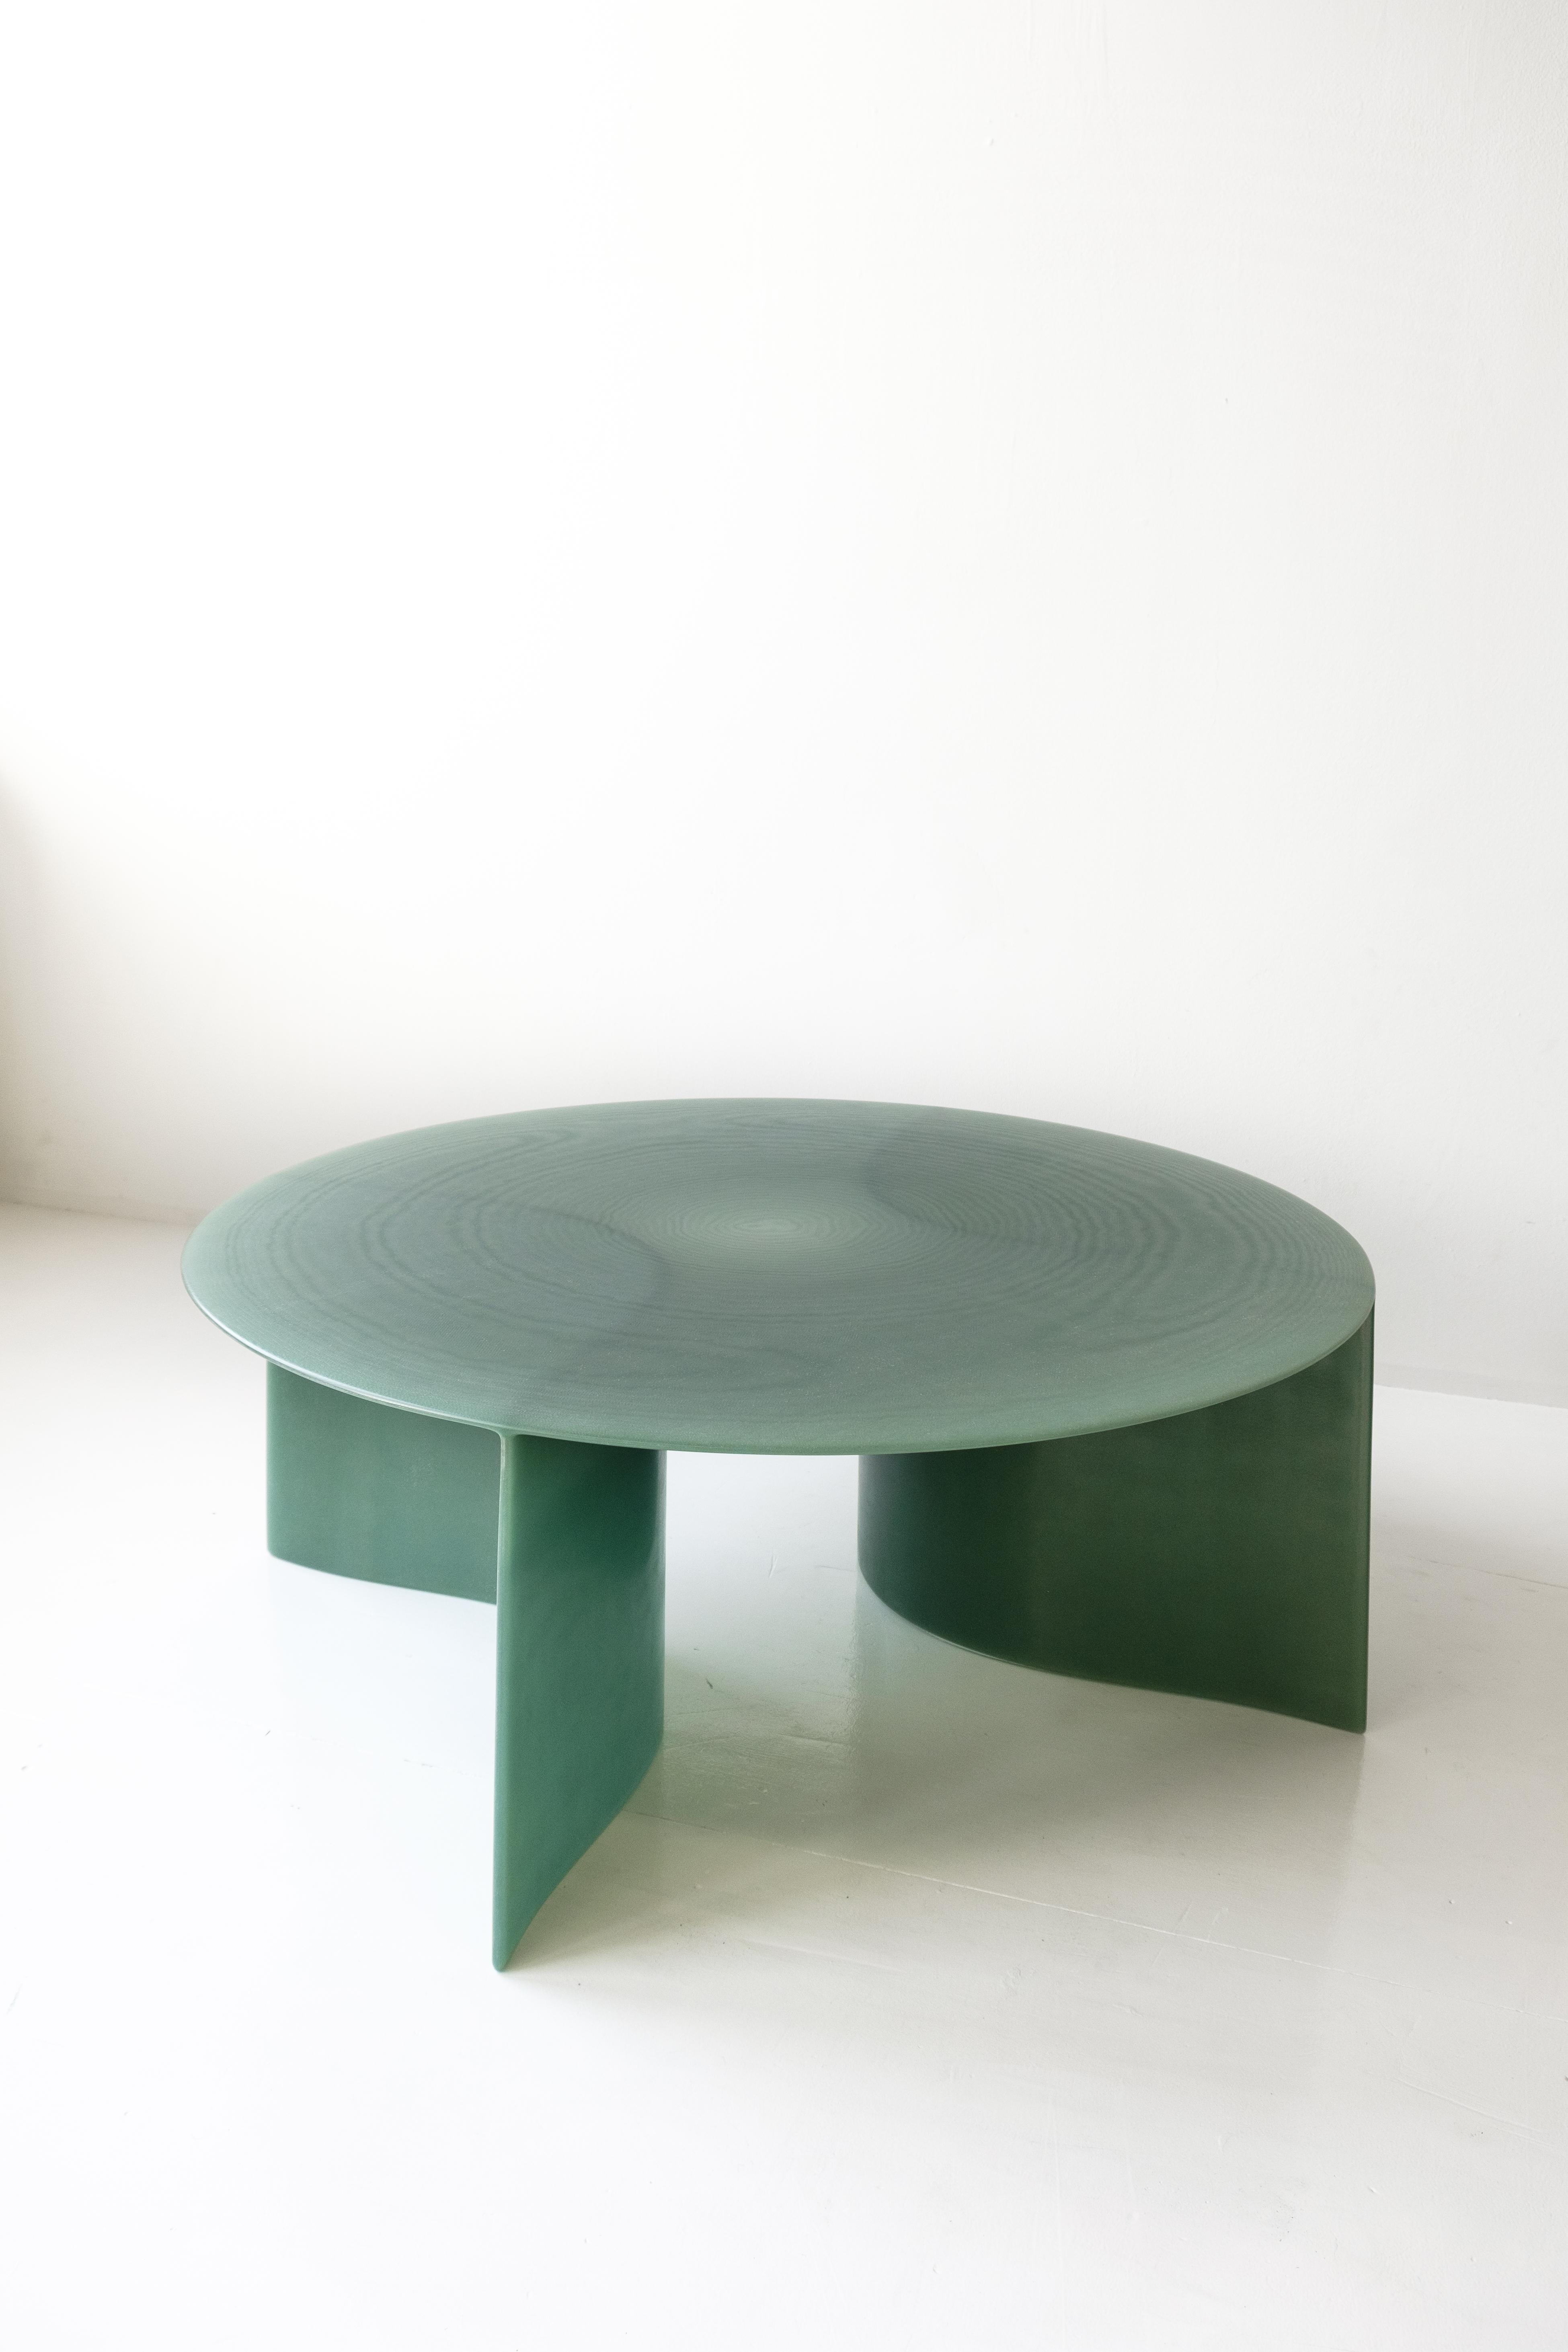 Contemporary Green Fiberglass, New Wave Coffee Table Round 120cm, by Lukas Cober For Sale 1